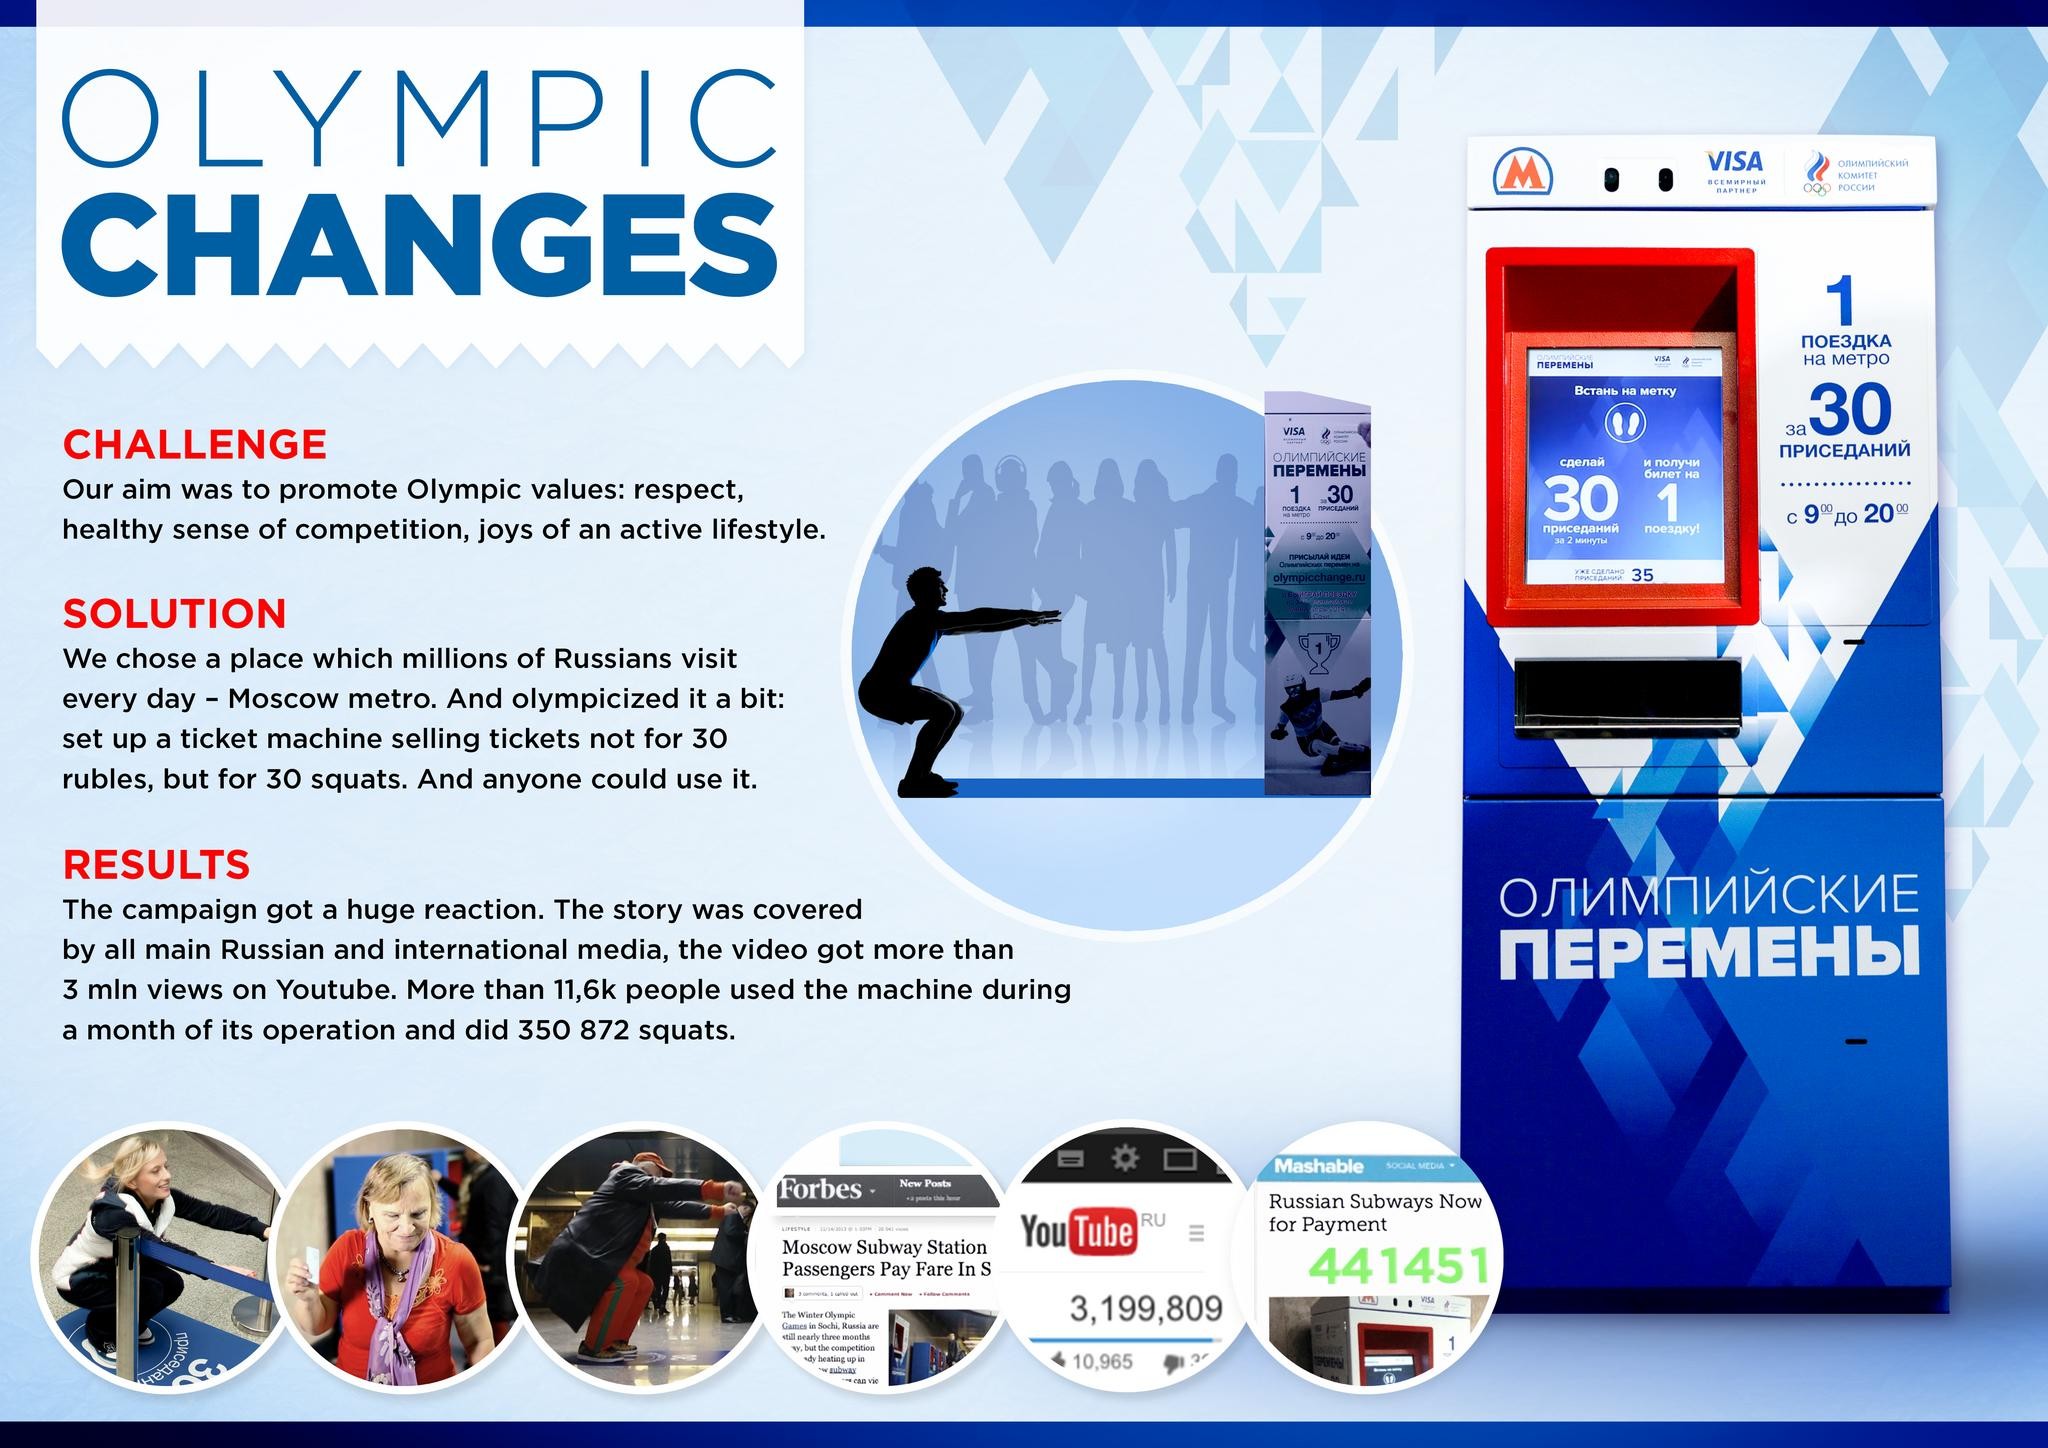 OLYMPIC CHANGES